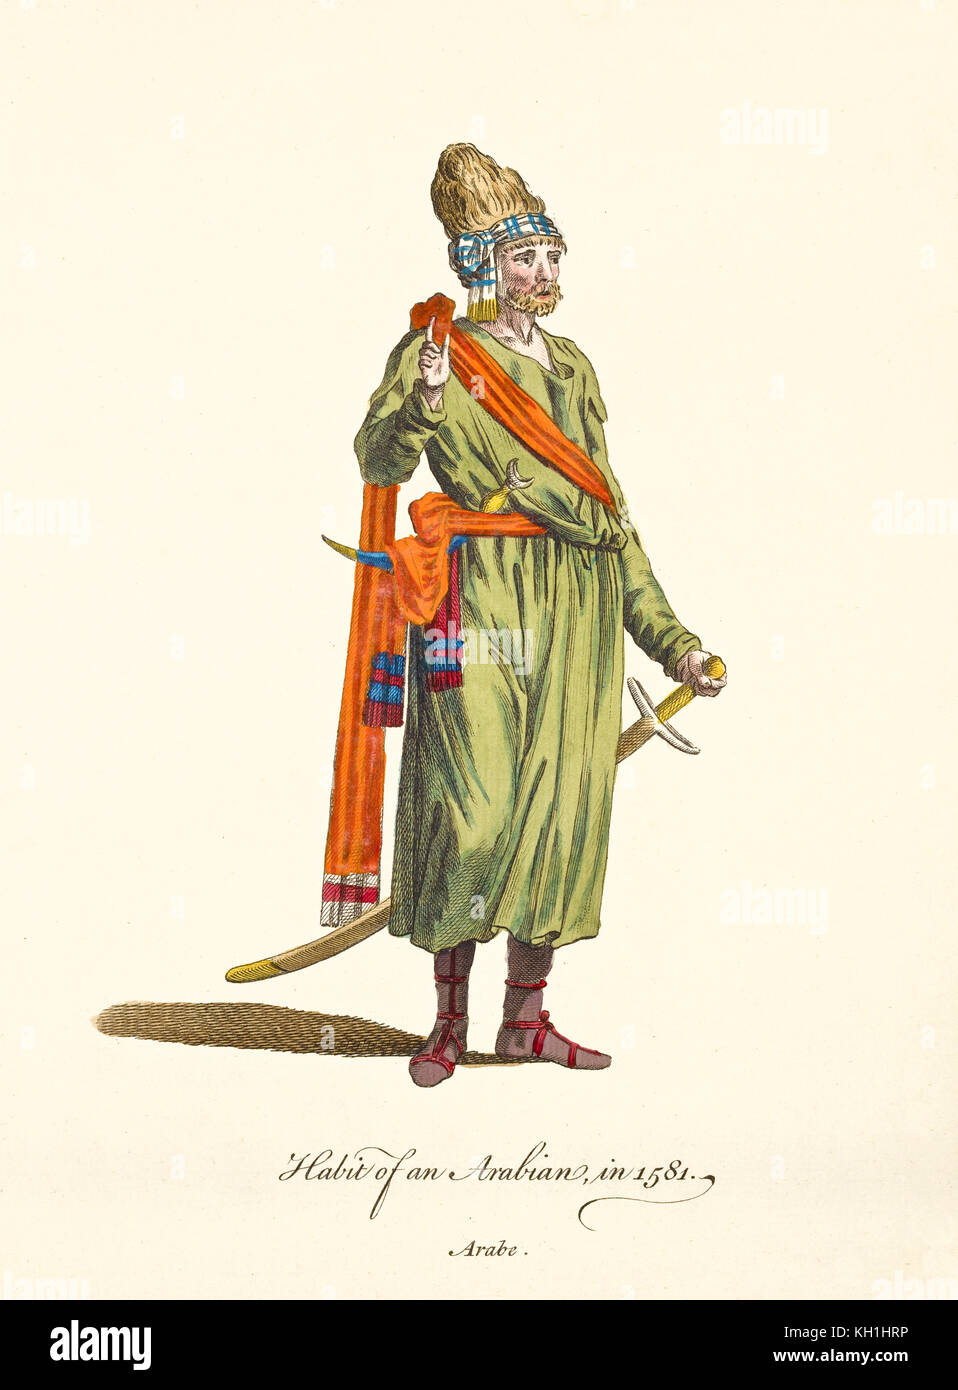 Arabian man in traditional dresses in 1581. Warrior clothes with sworld and dagger. Old illustratiion by J.M. Vien, publ. T. Jefferys, 1757-1772 Stock Photo